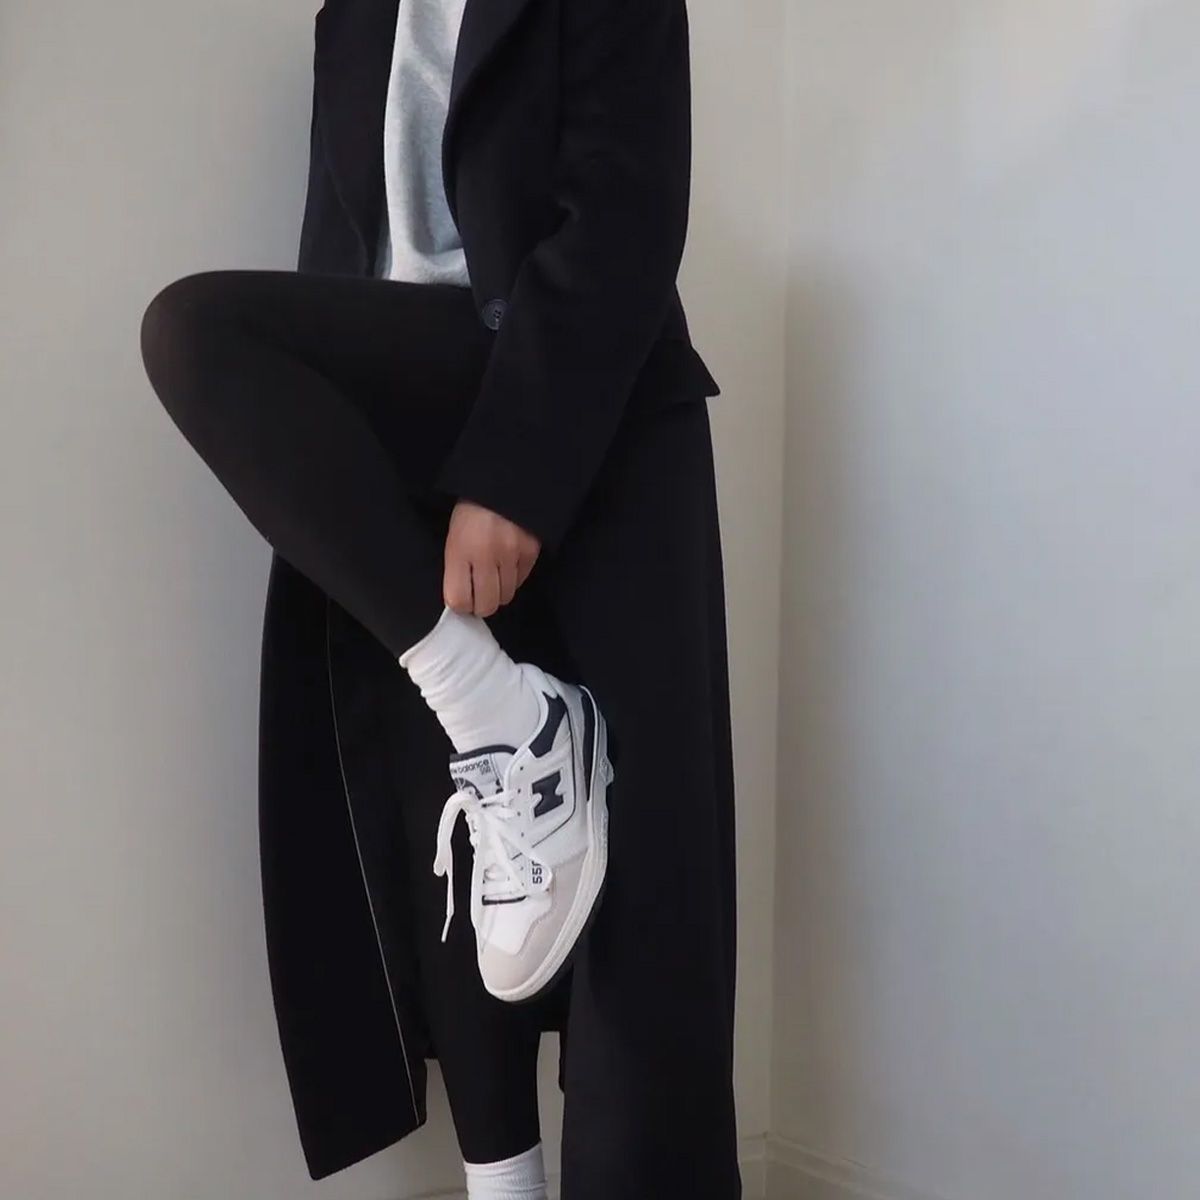 oversized shirt with leggings and converse｜TikTok Search